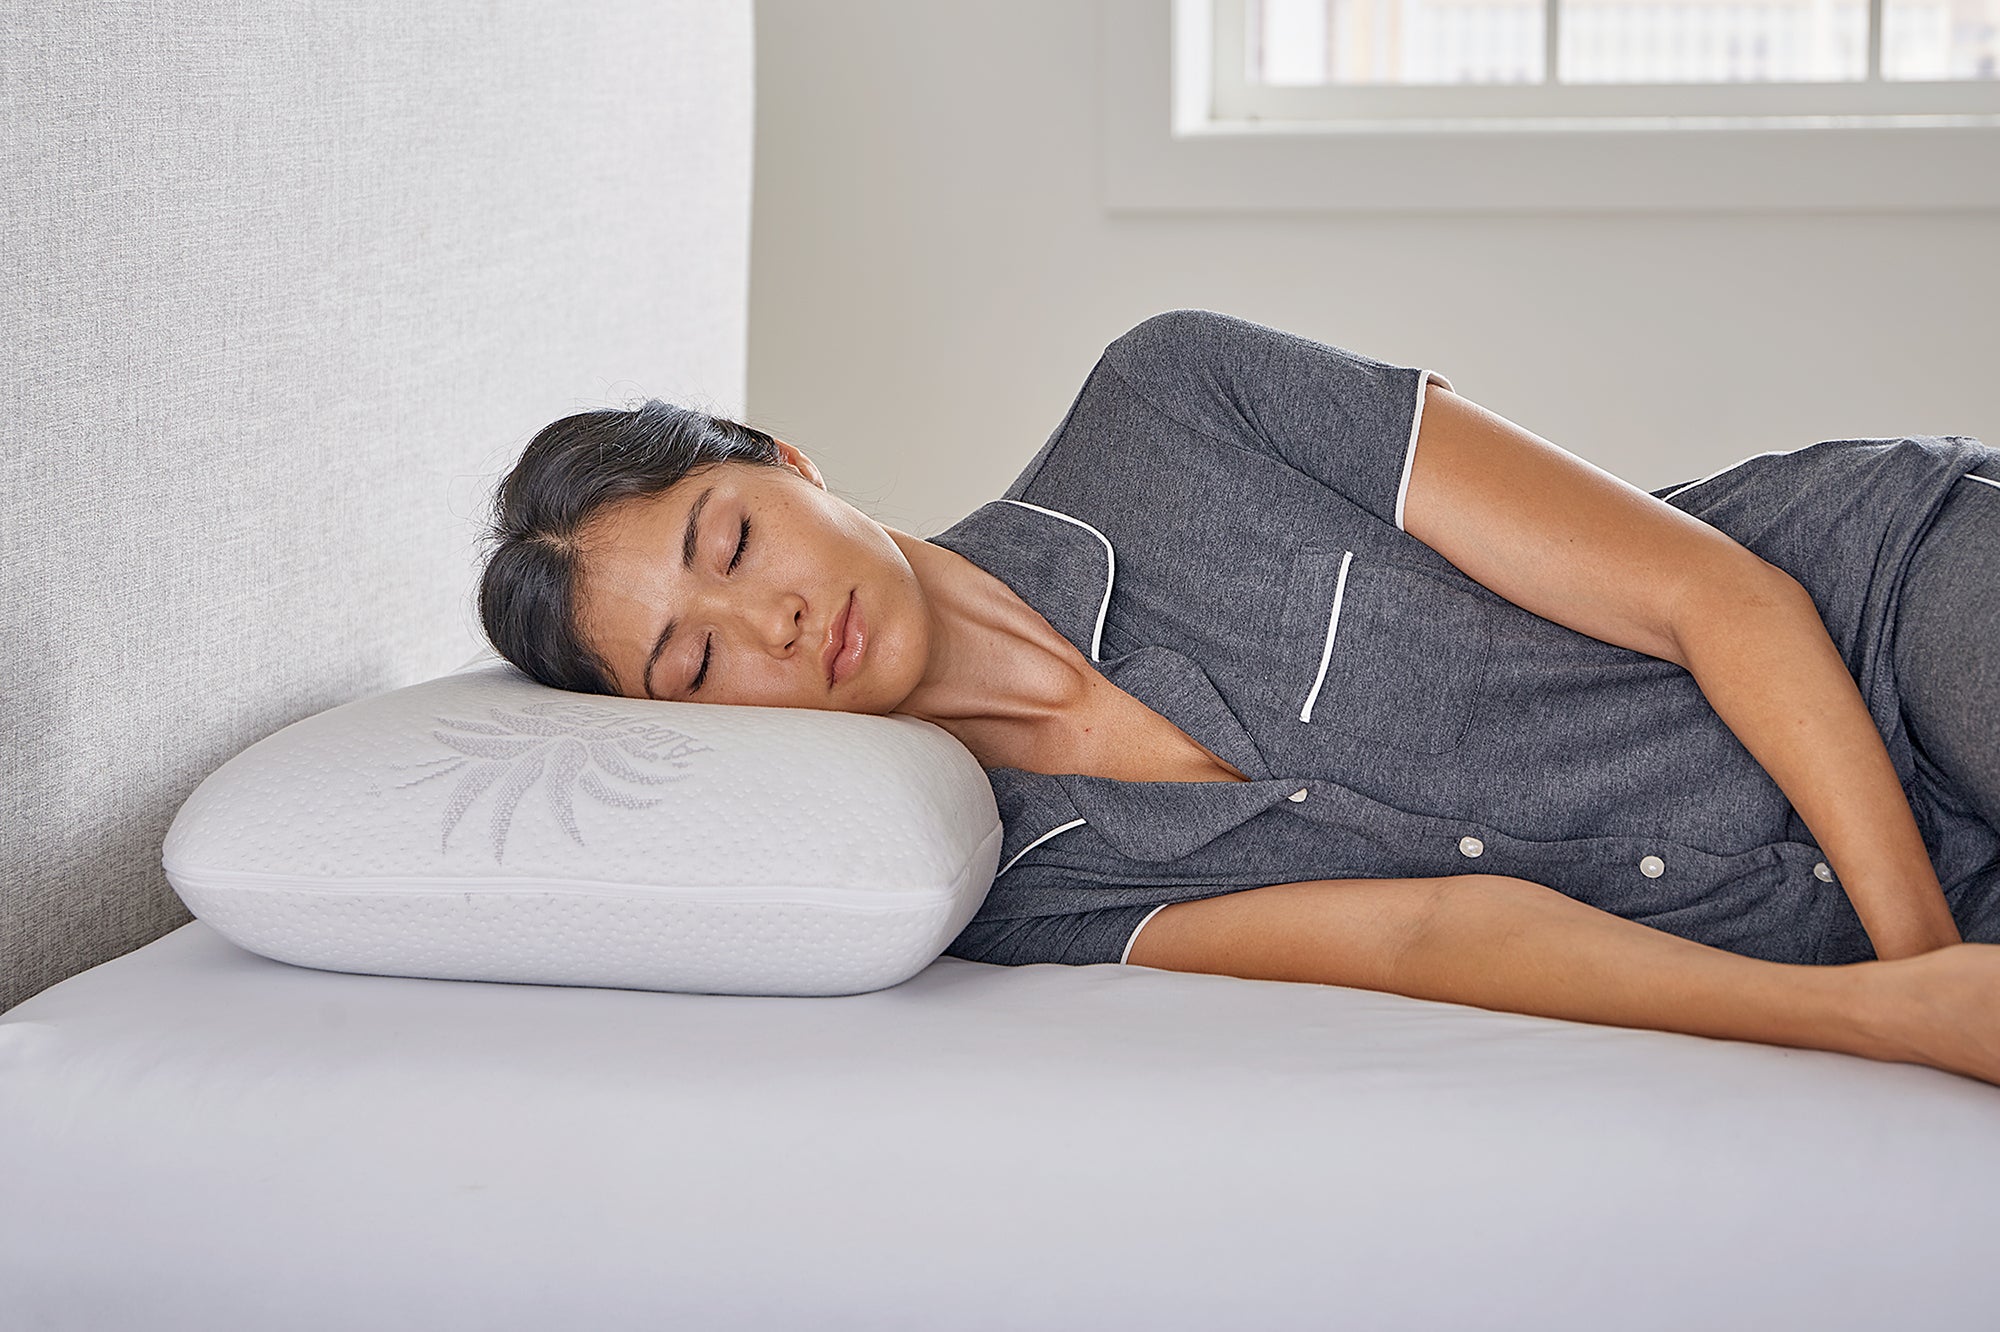 Image of Mlily Serenity Contour Pillow